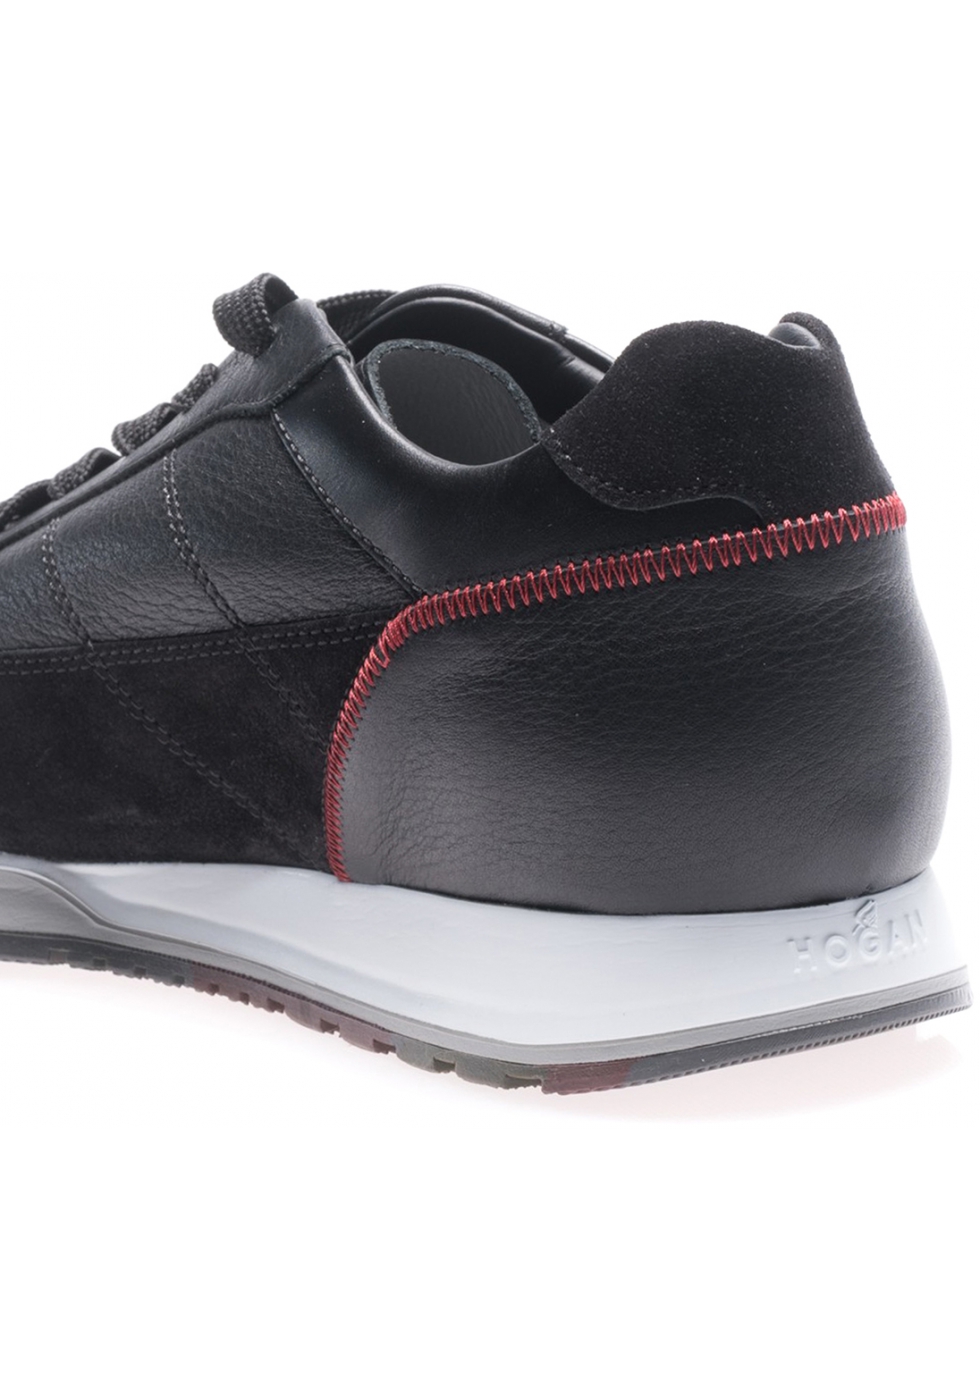 Hogan men's sneakers in black leather and suede - Italian Boutique